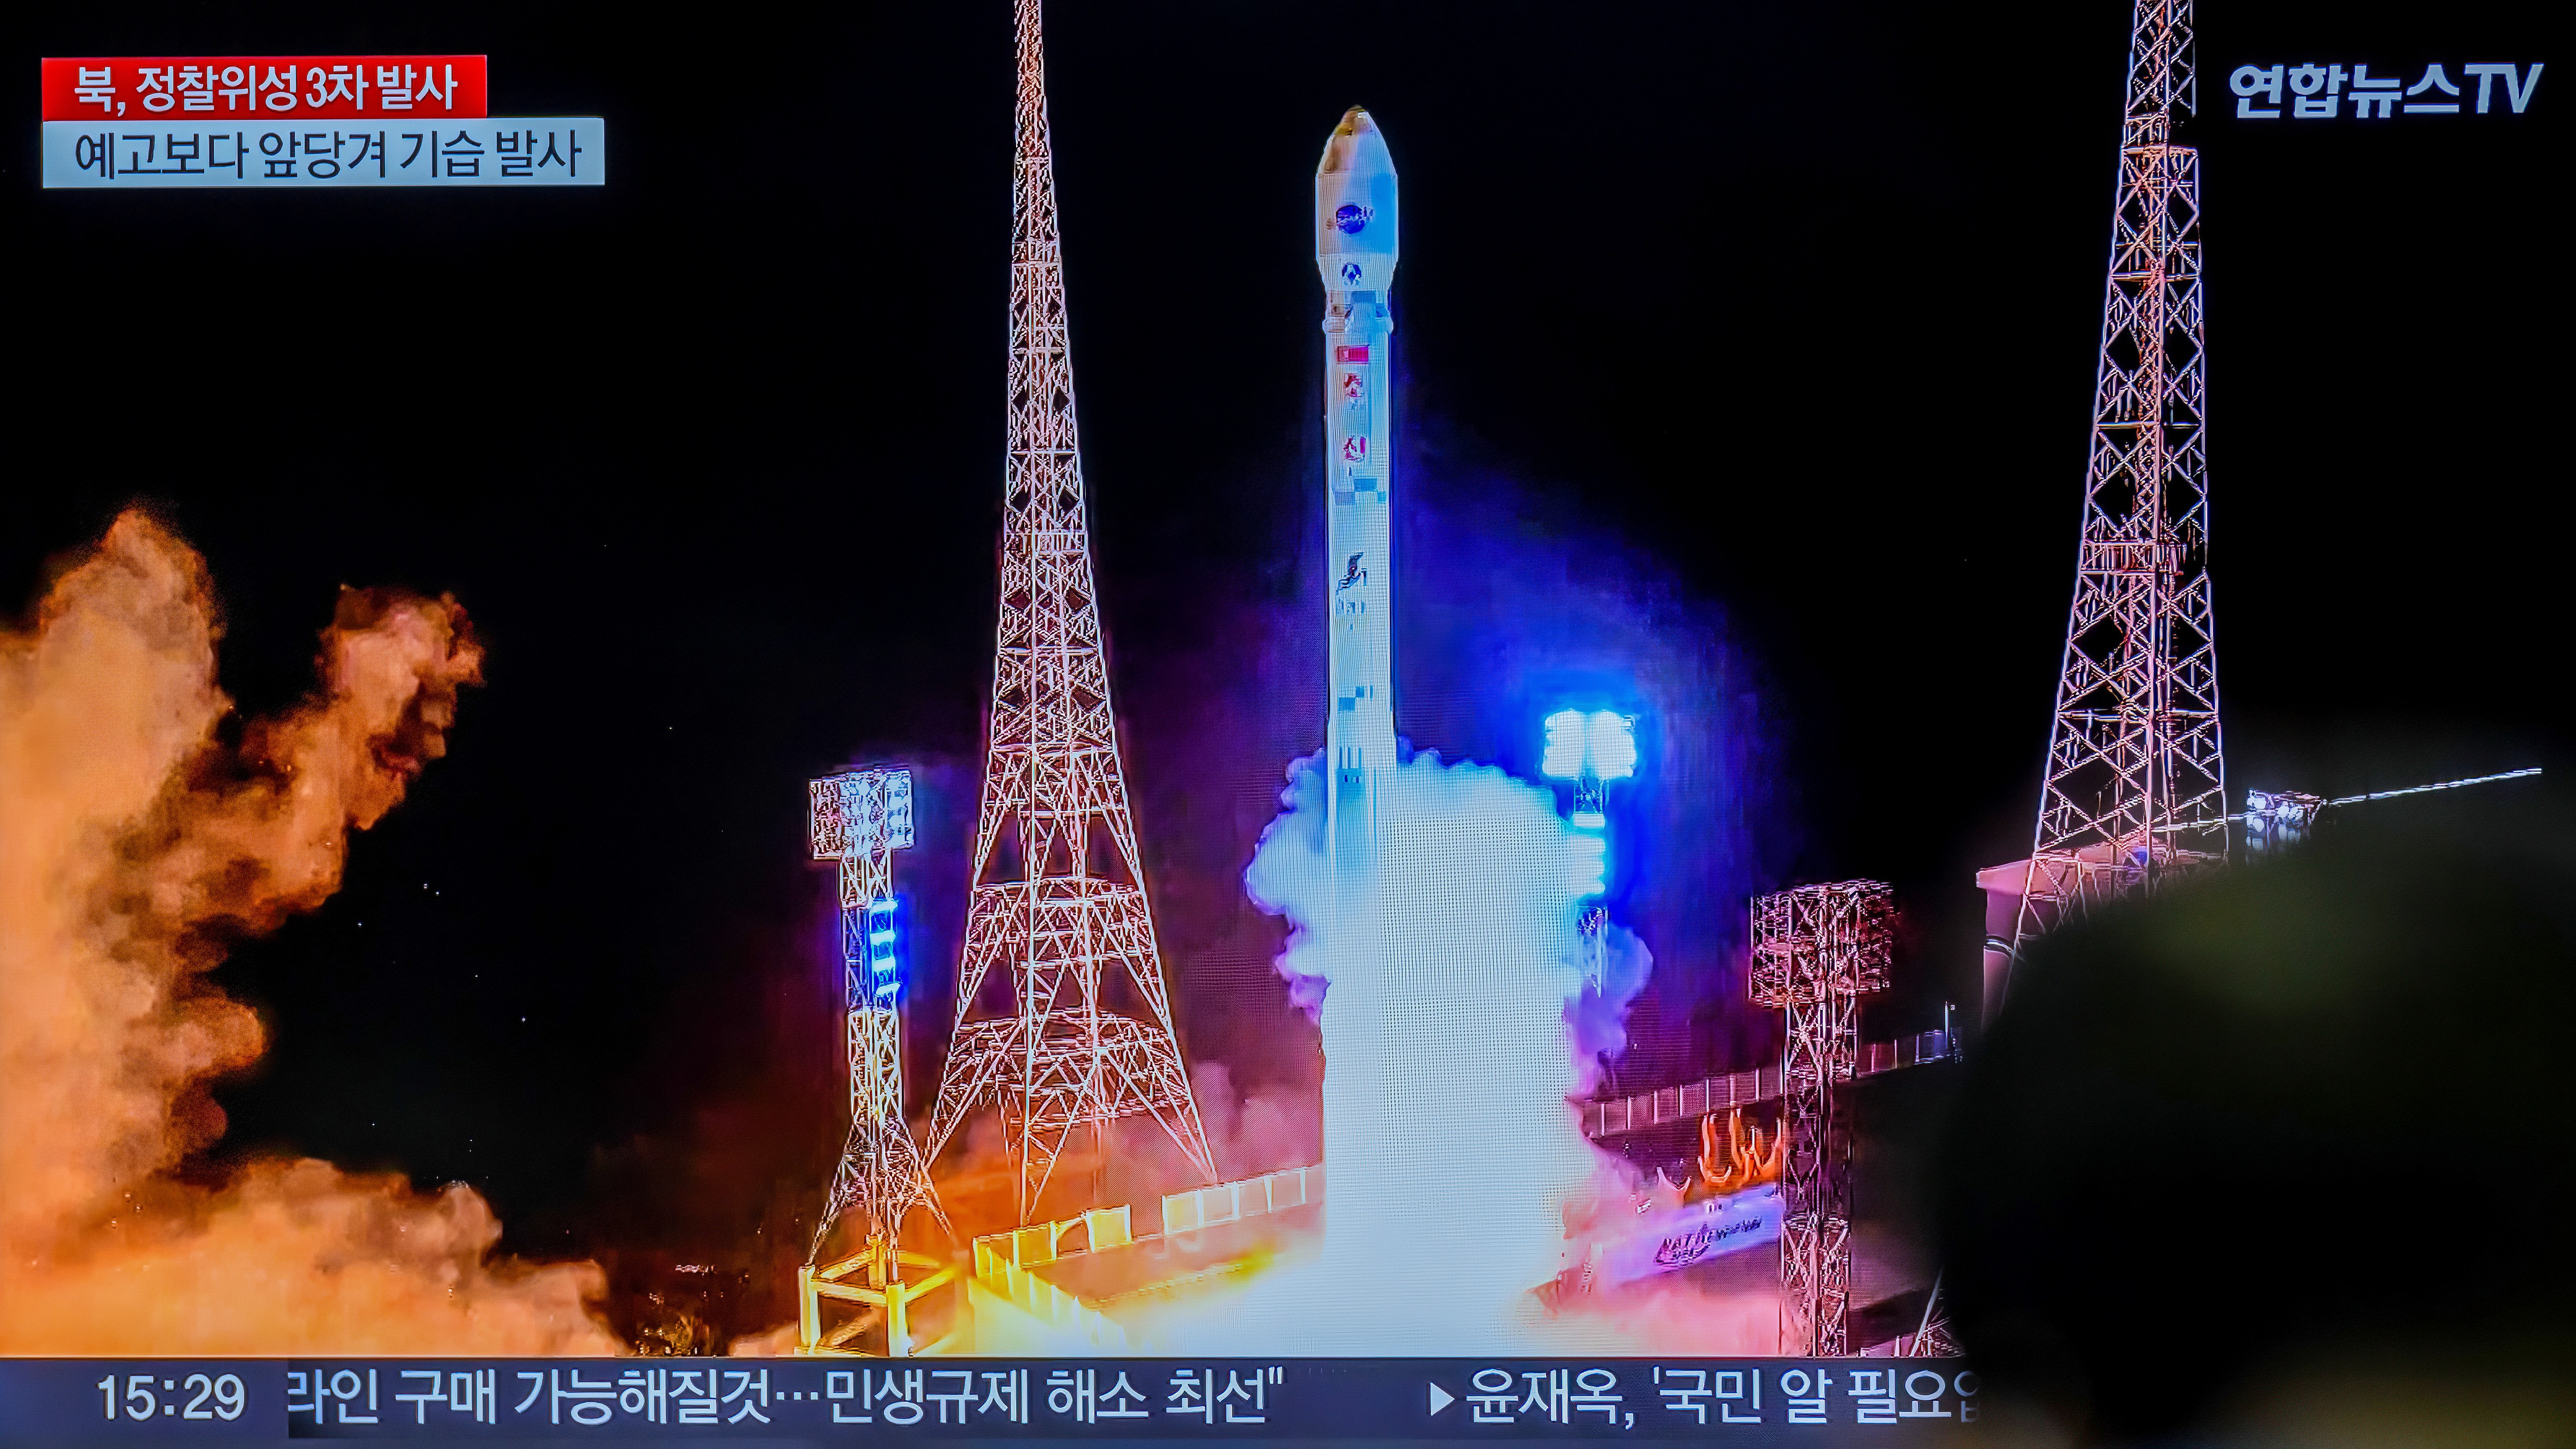 North Korea rocket explodes during spy satellite launch, and meteor hunters caught it on camera: report Space